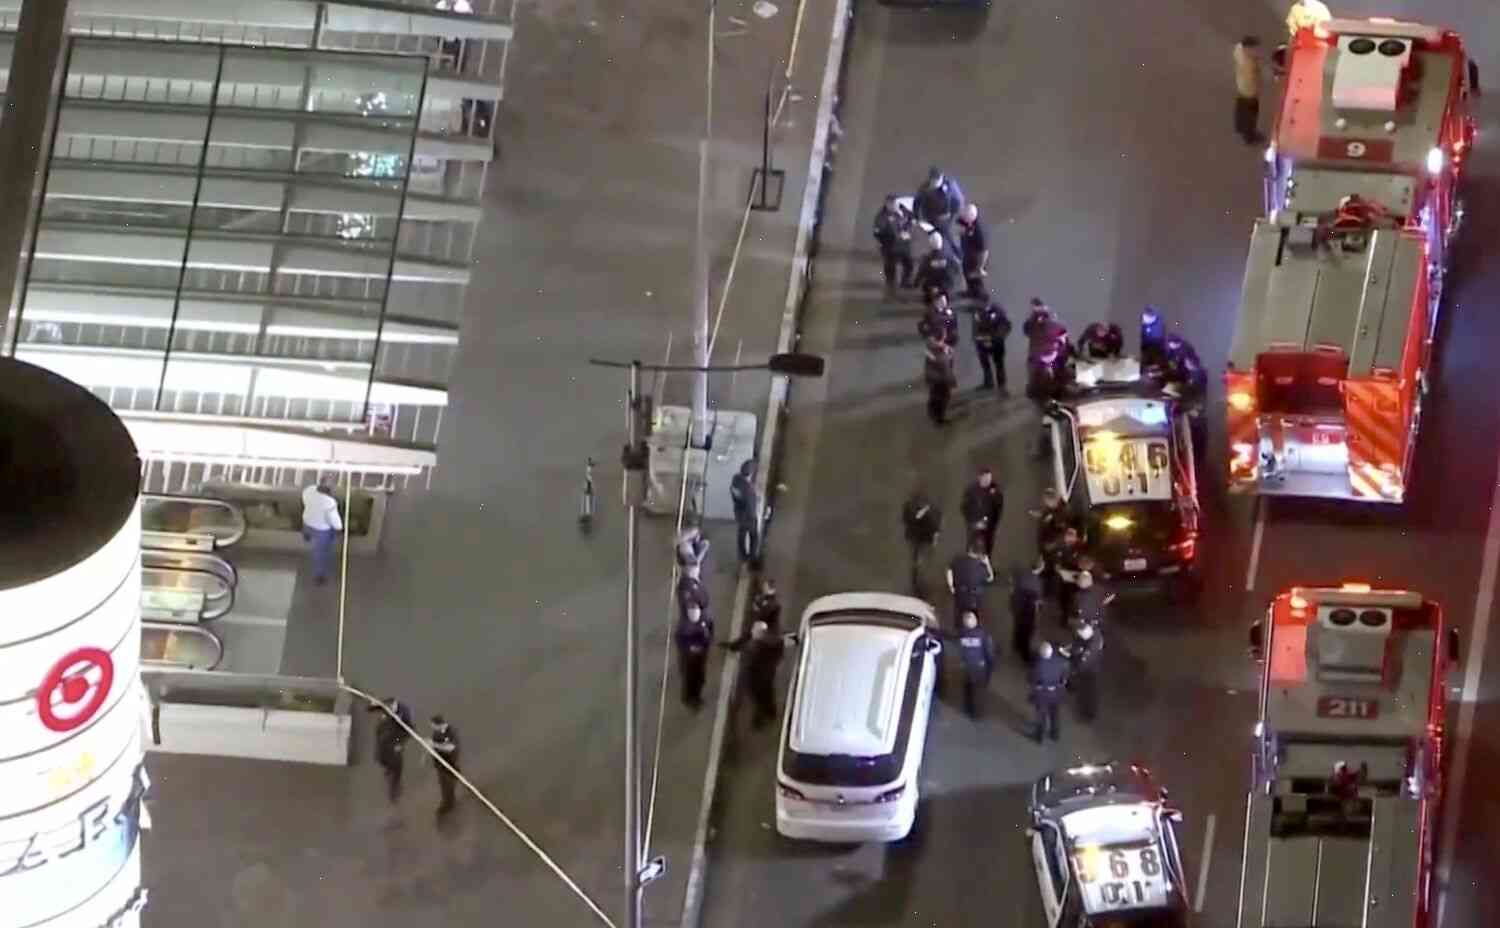 Man with gun shot in the body or arm at Subway restaurant in downtown Los Angeles